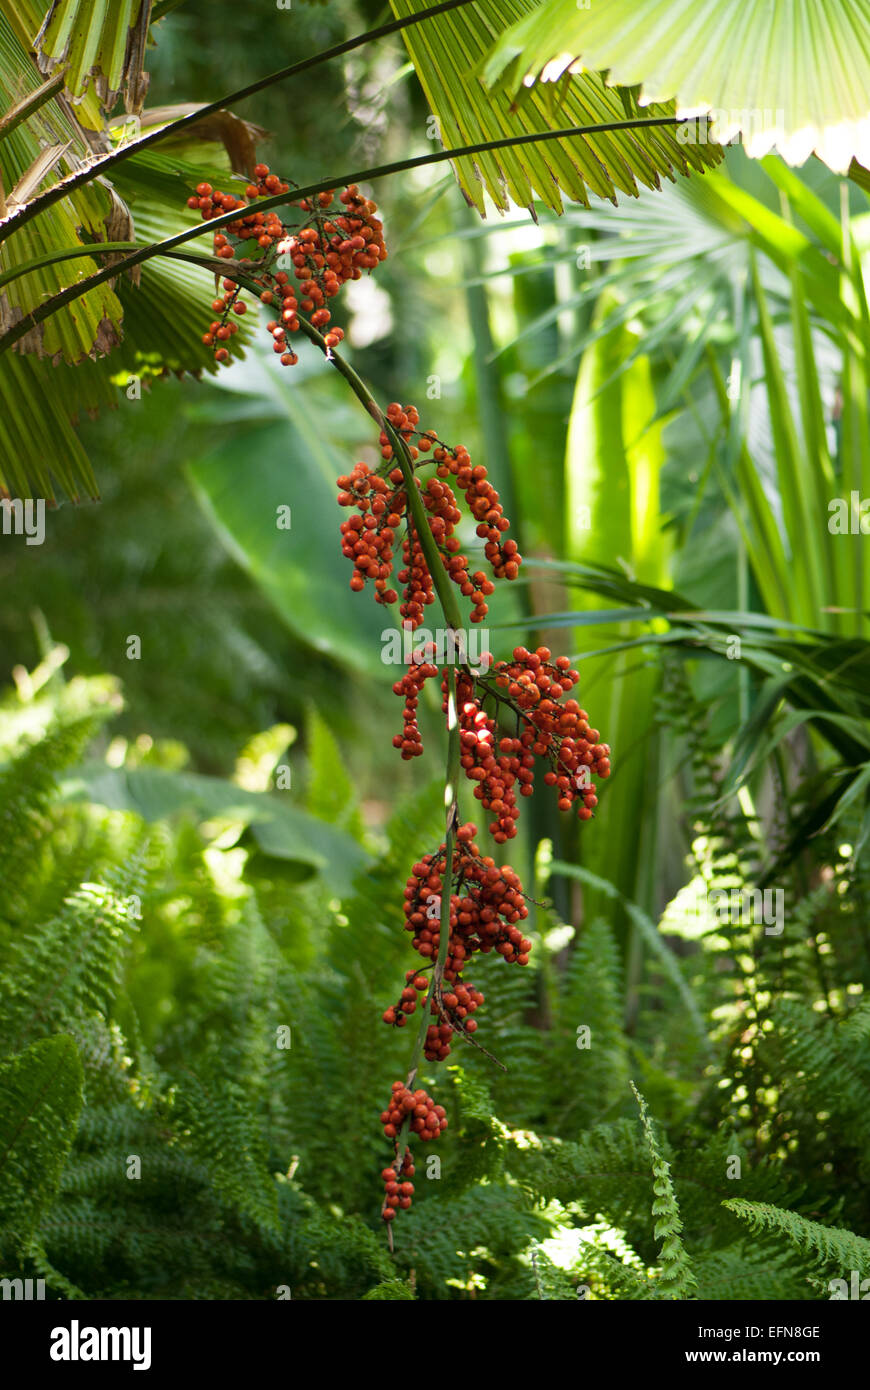 The orange/red fruits of the ruffled fan palm, Licuala grandis. Stock Photo